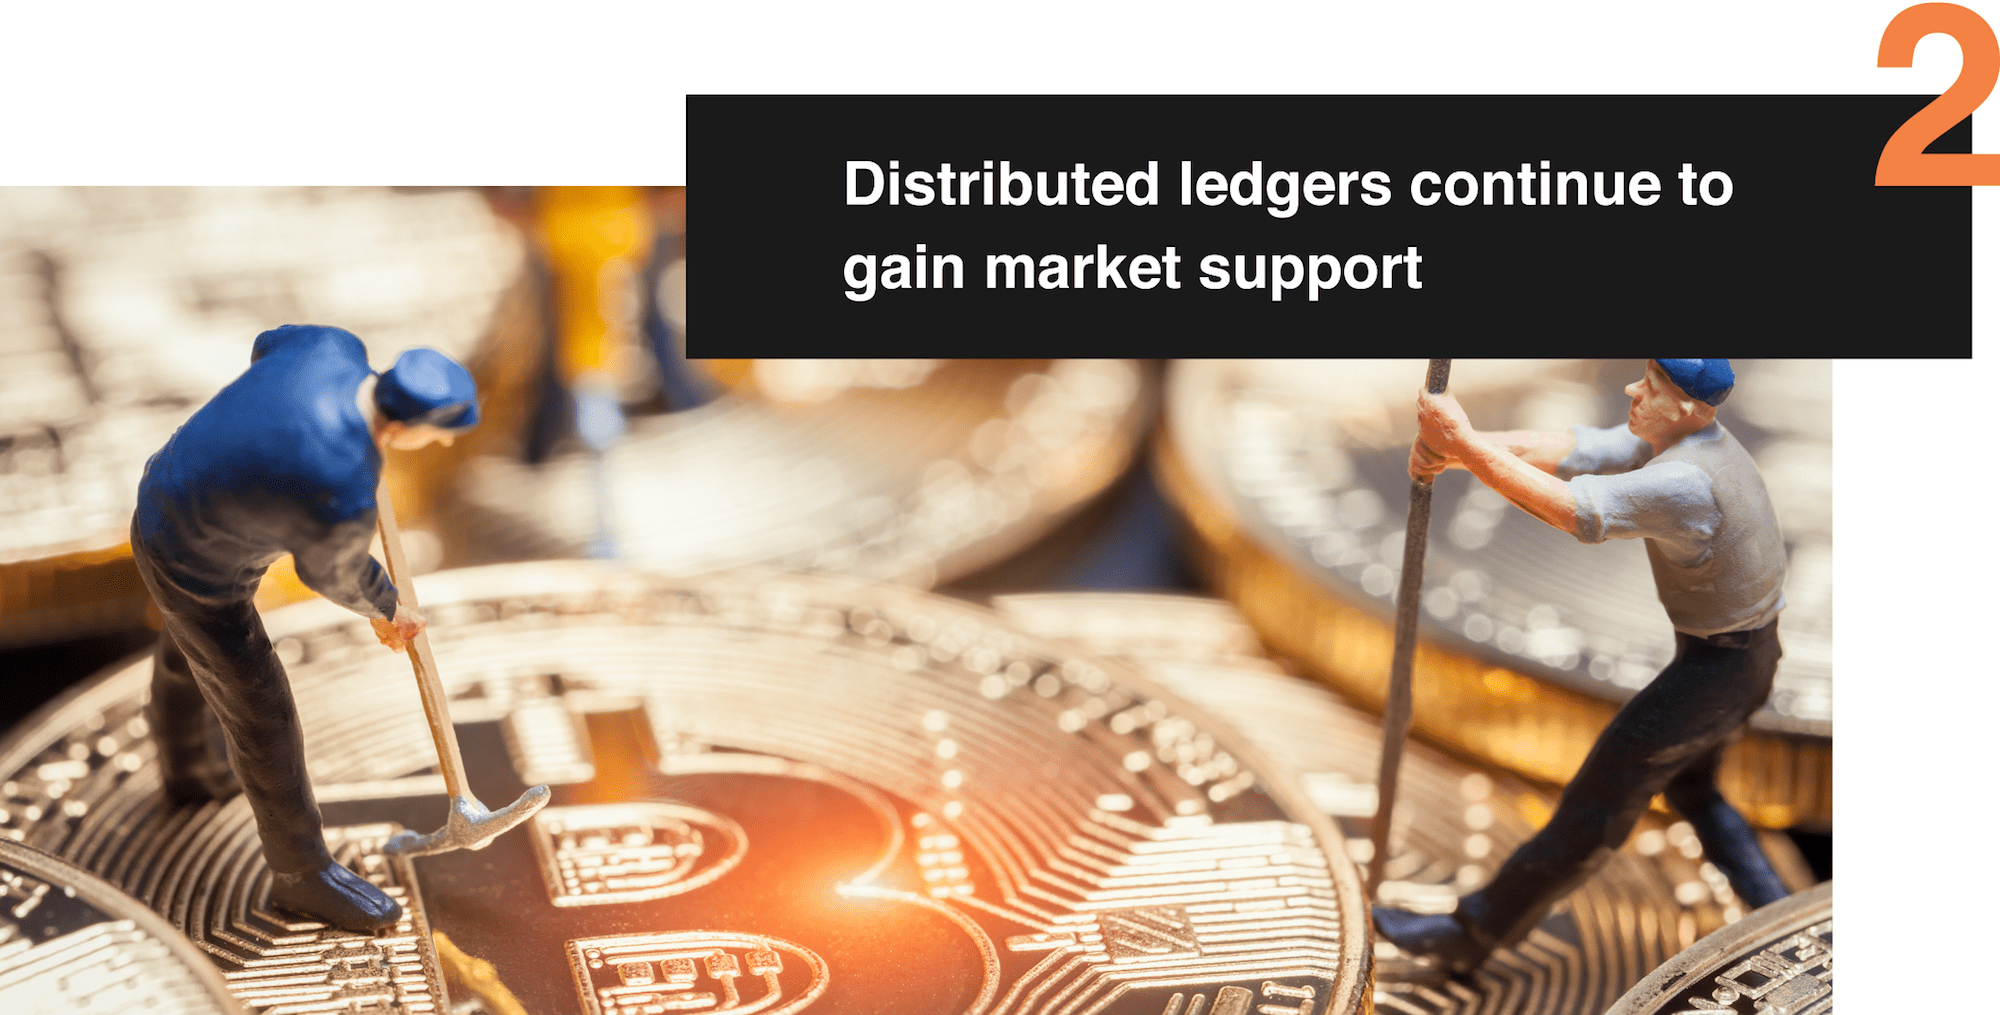 2. Distributed ledgers continue to gain market support